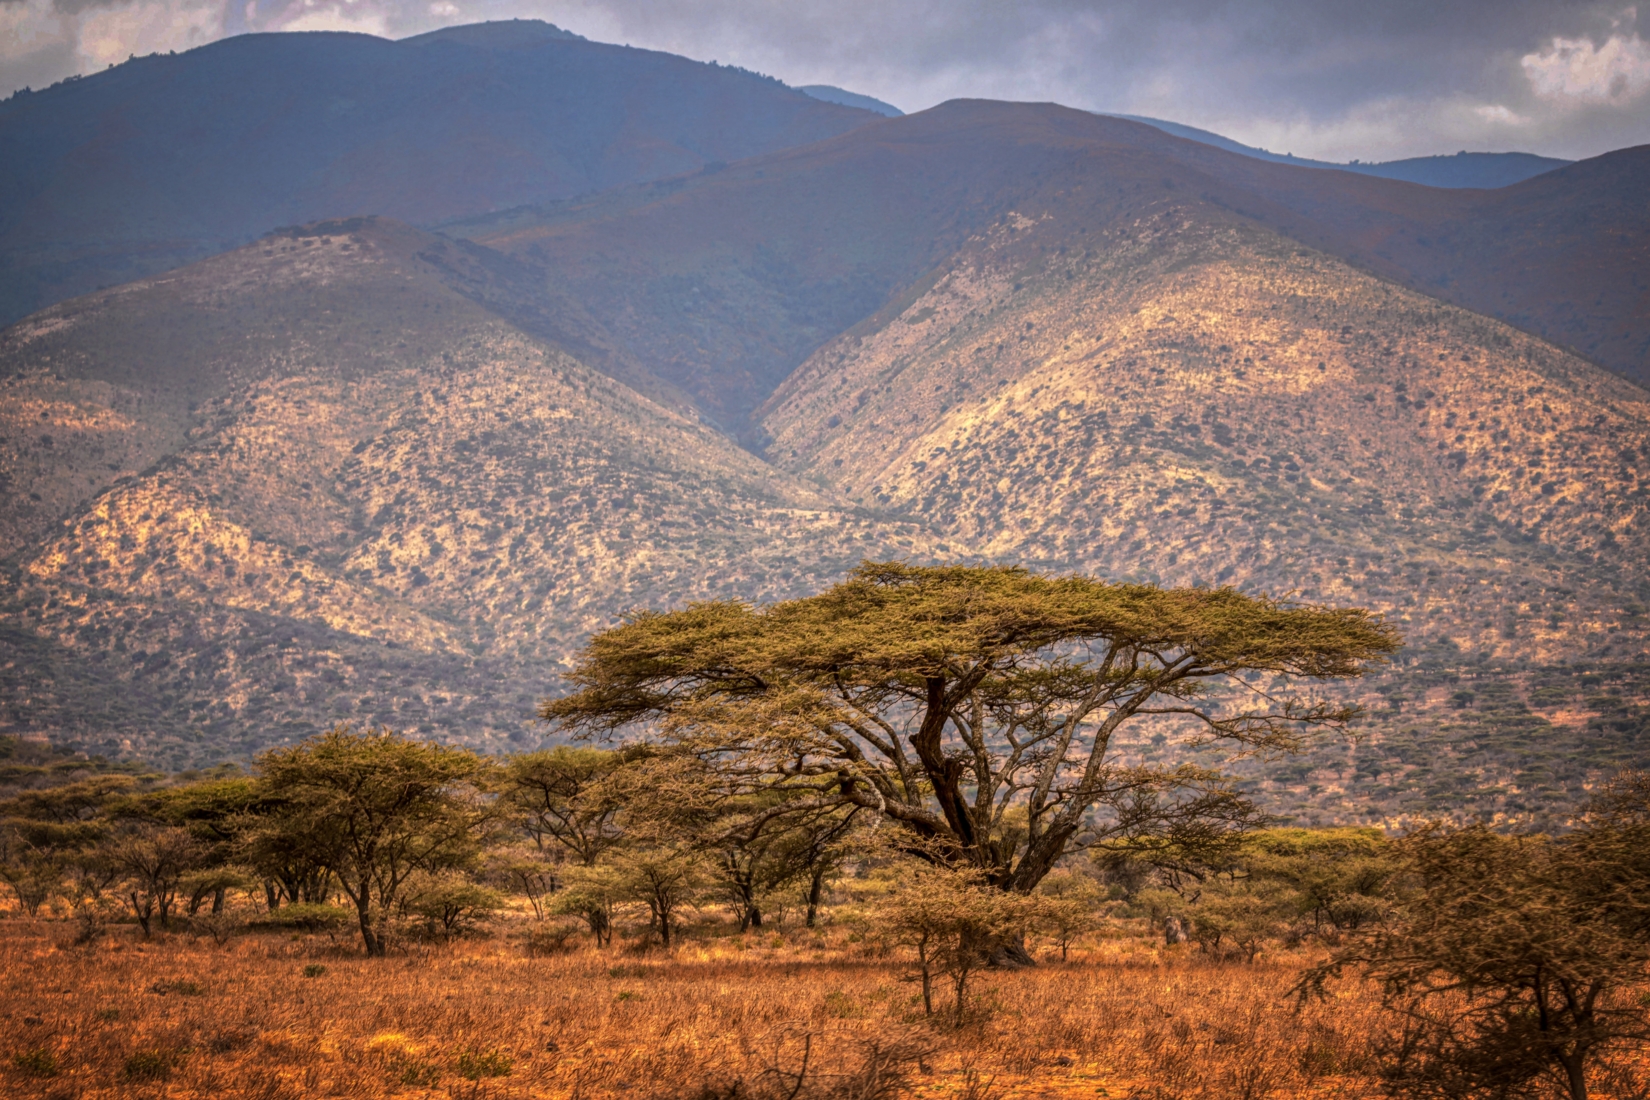 View of African mountains and trees in Moshi, Tanzania